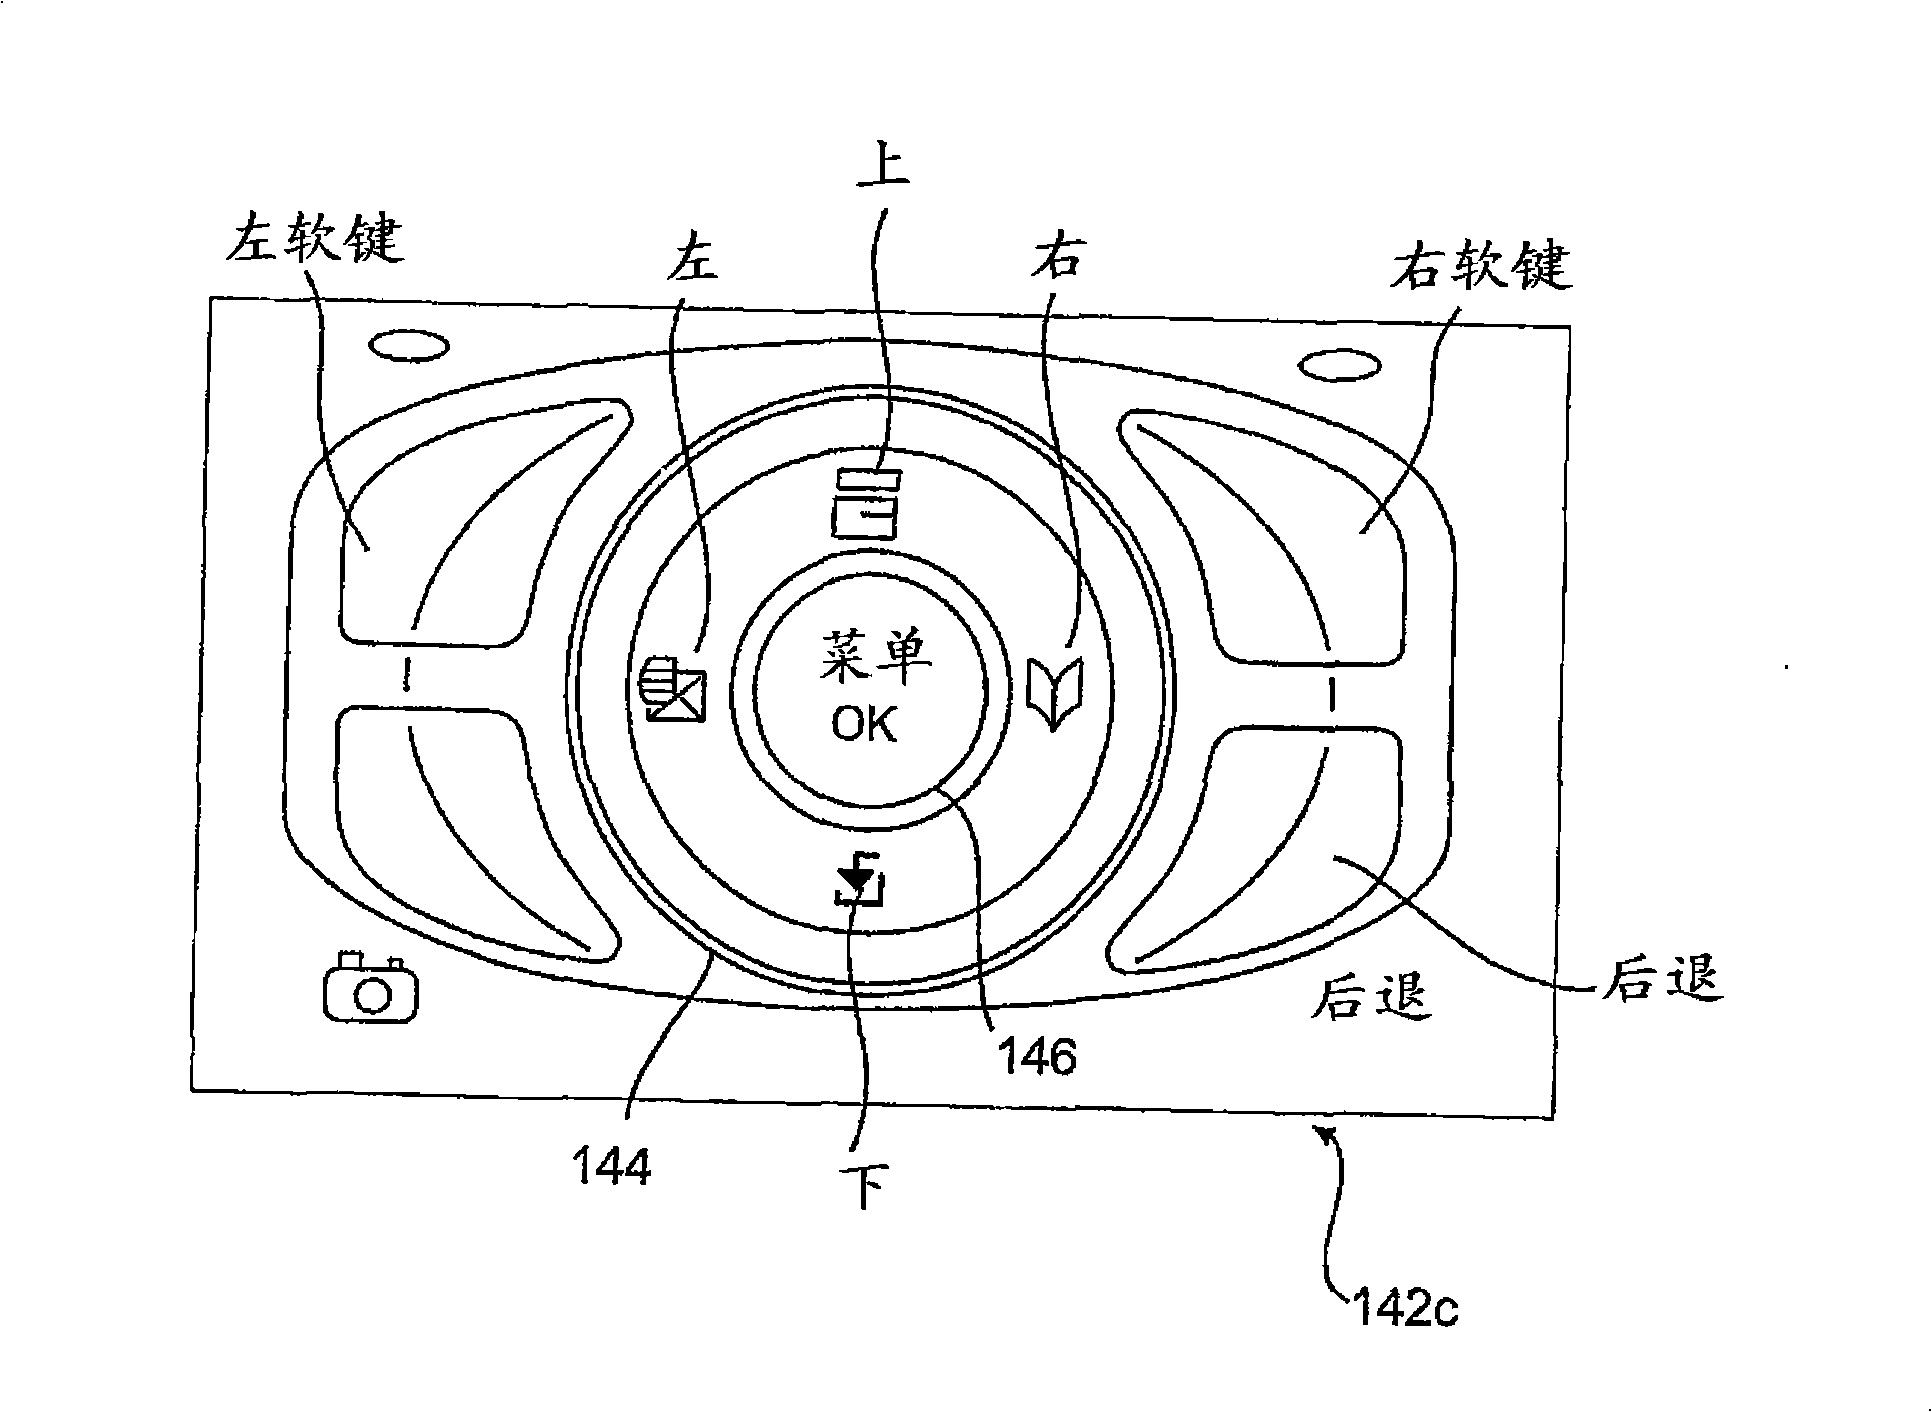 Graphical user interface for electronic devices